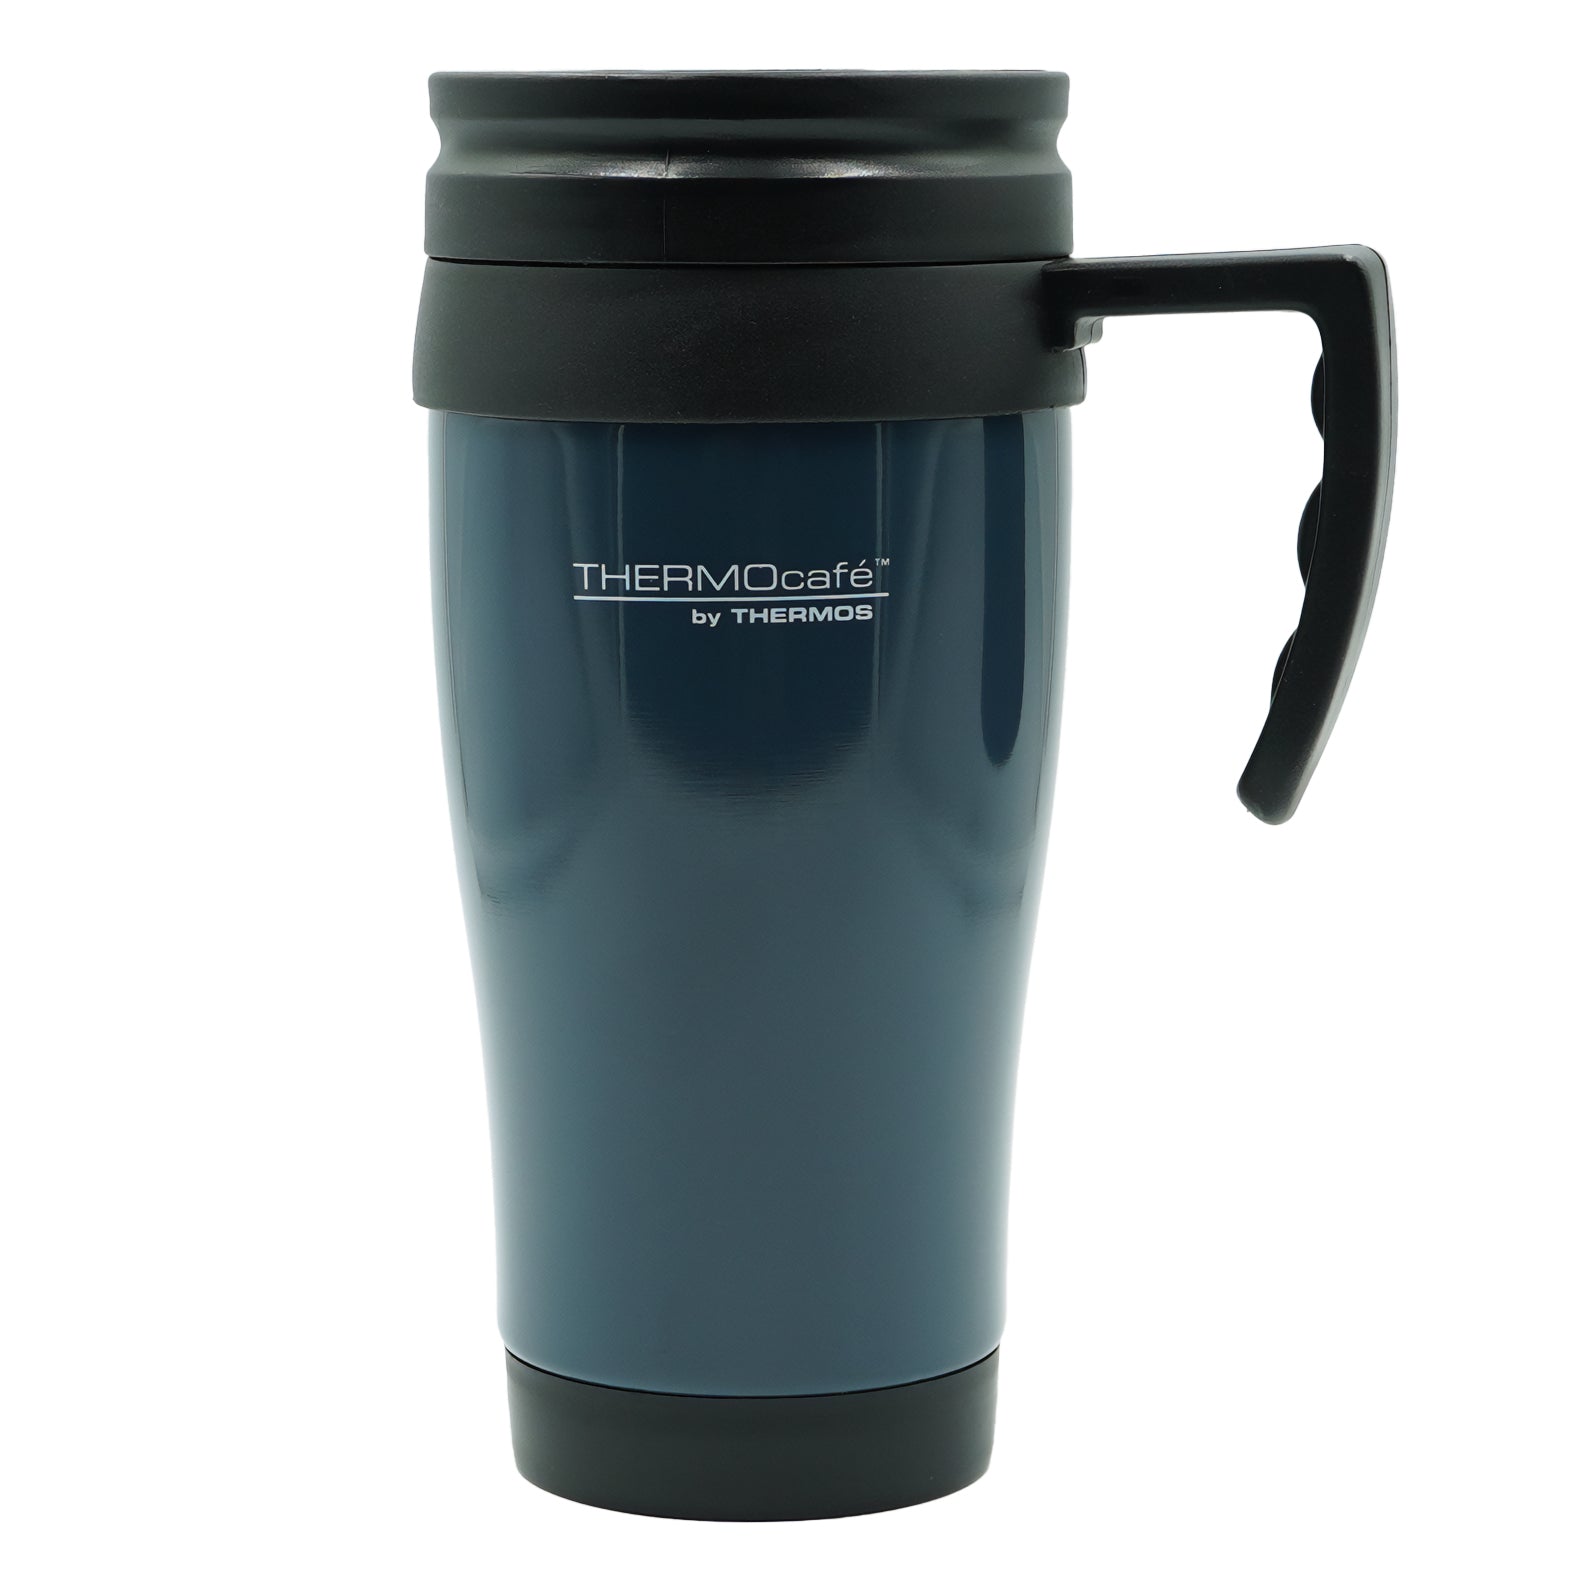 Thermos 14 oz. Foam Insulated Travel Mug - Charcoal/Navy Thermos